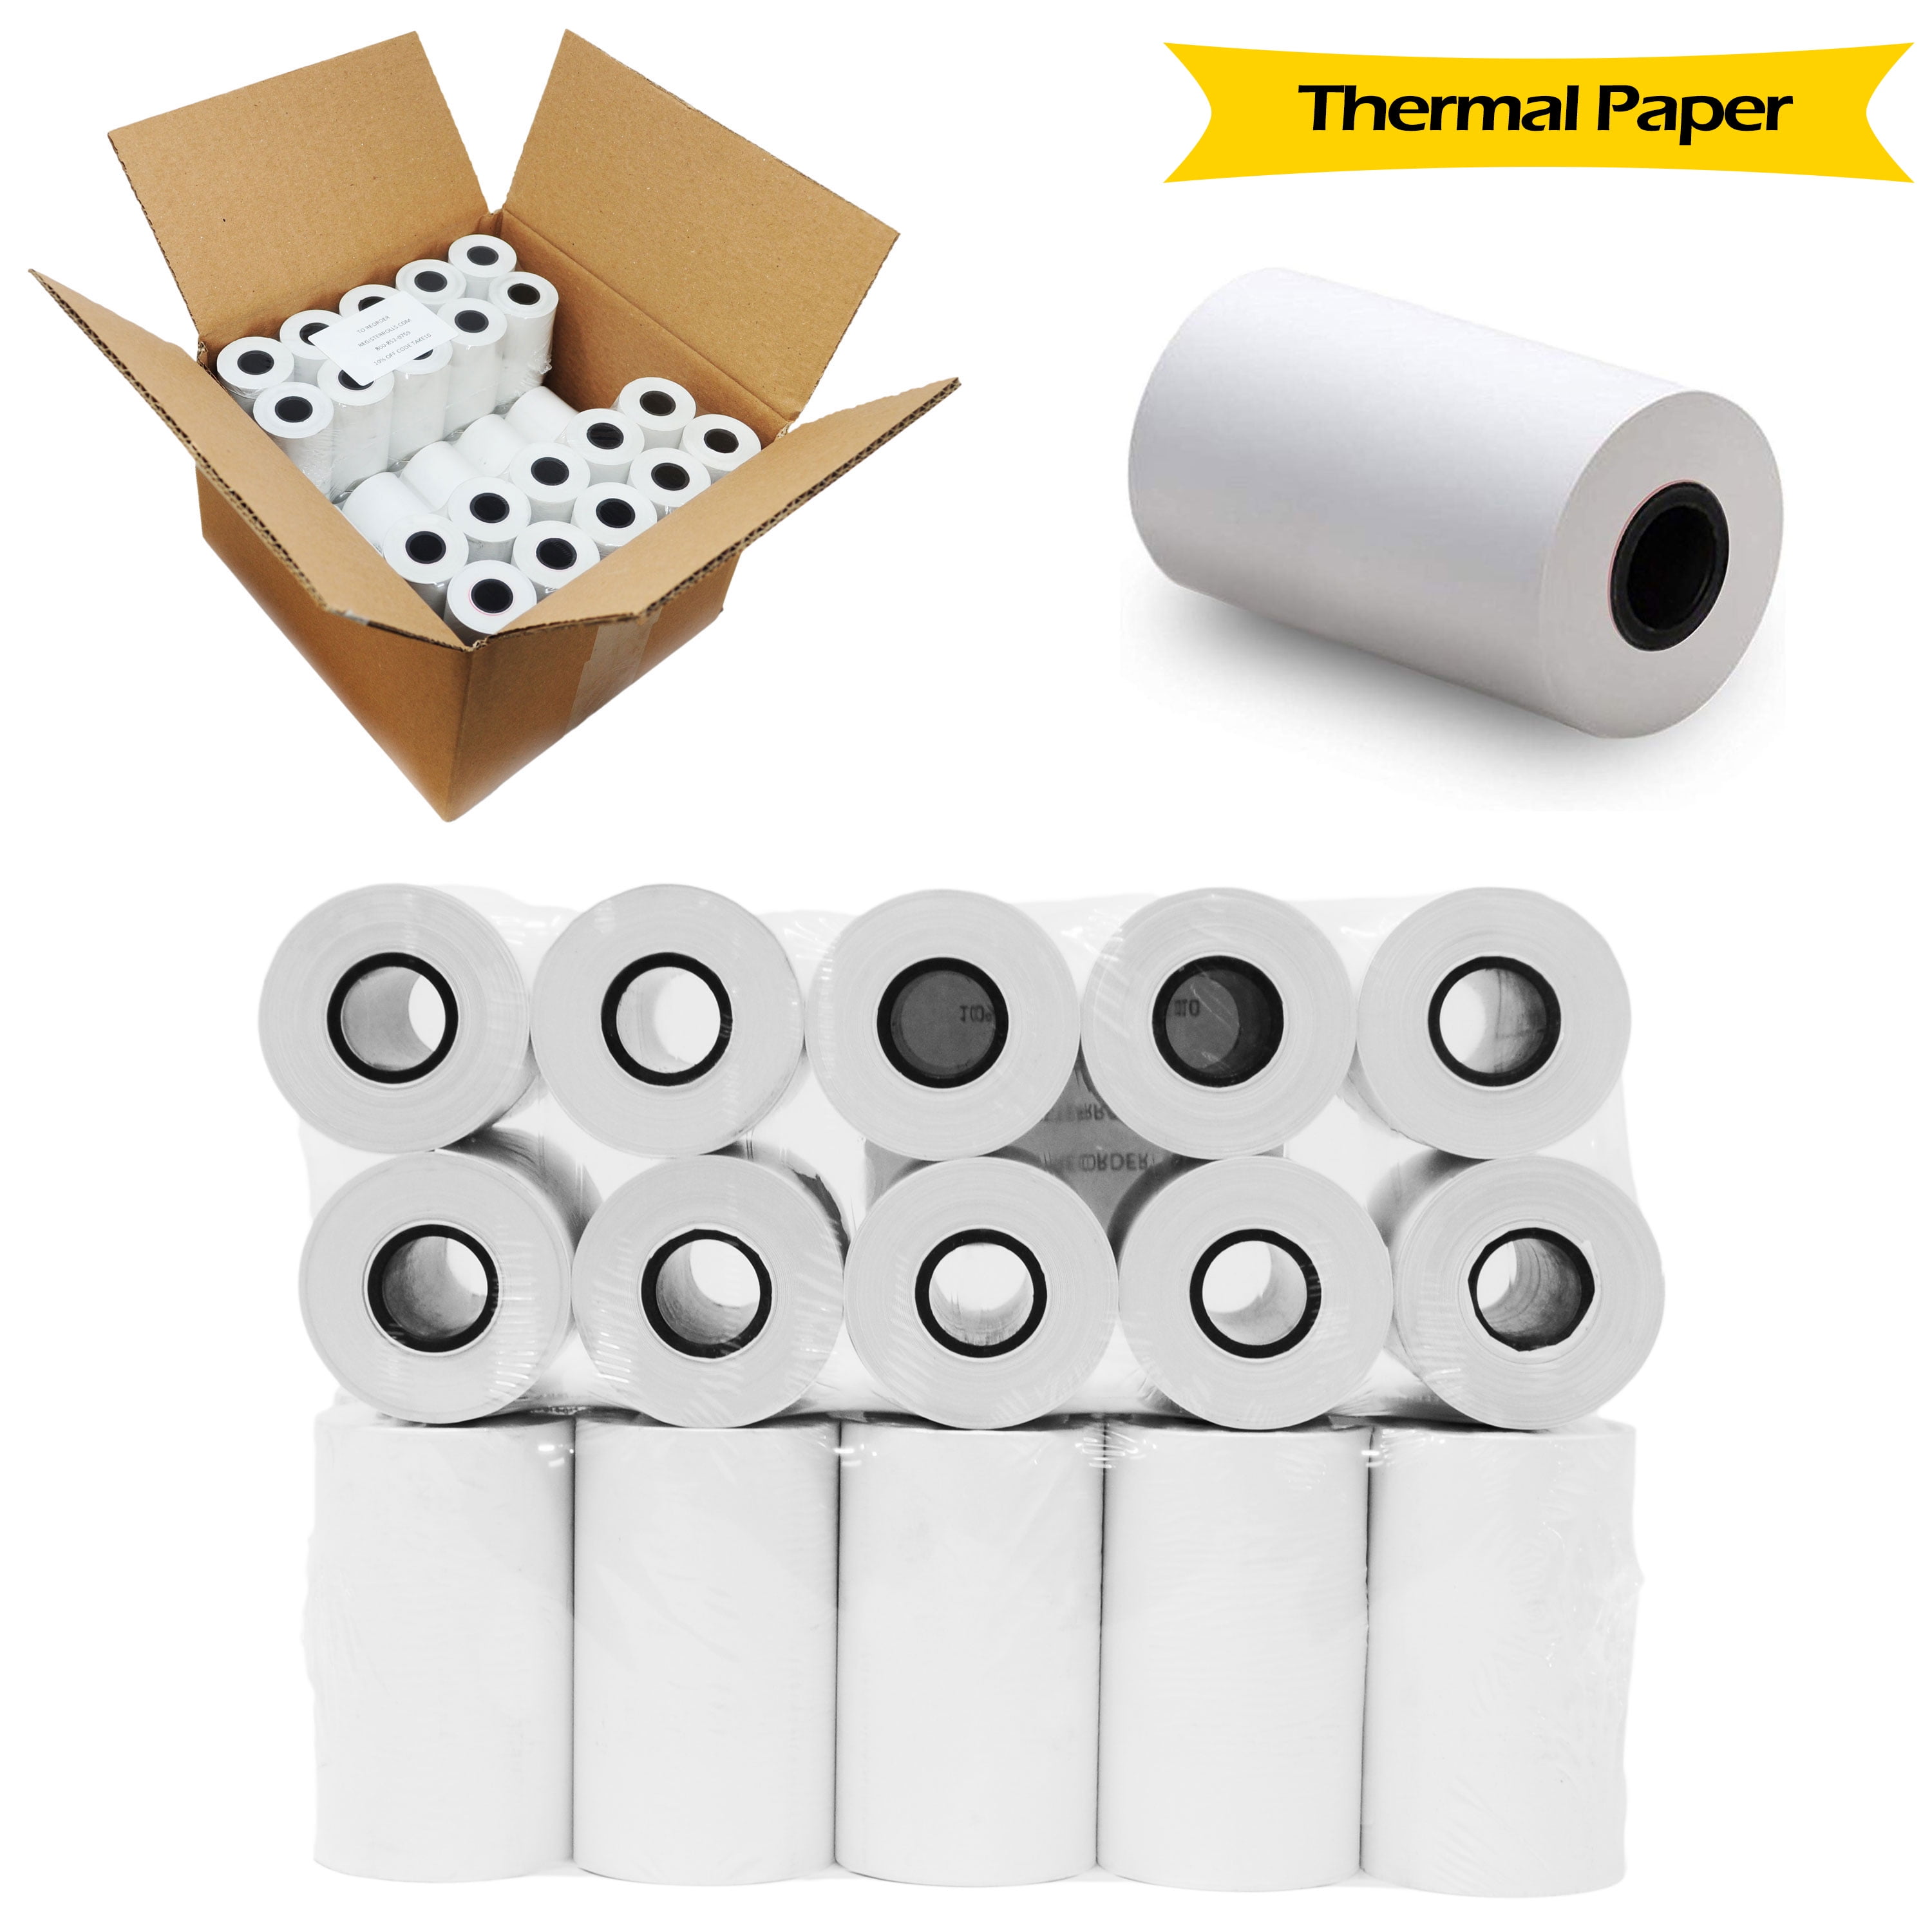 Buyregisterrolls Paper Tape Size 2.25 or 2 1/4 x 50 Feet Thermal